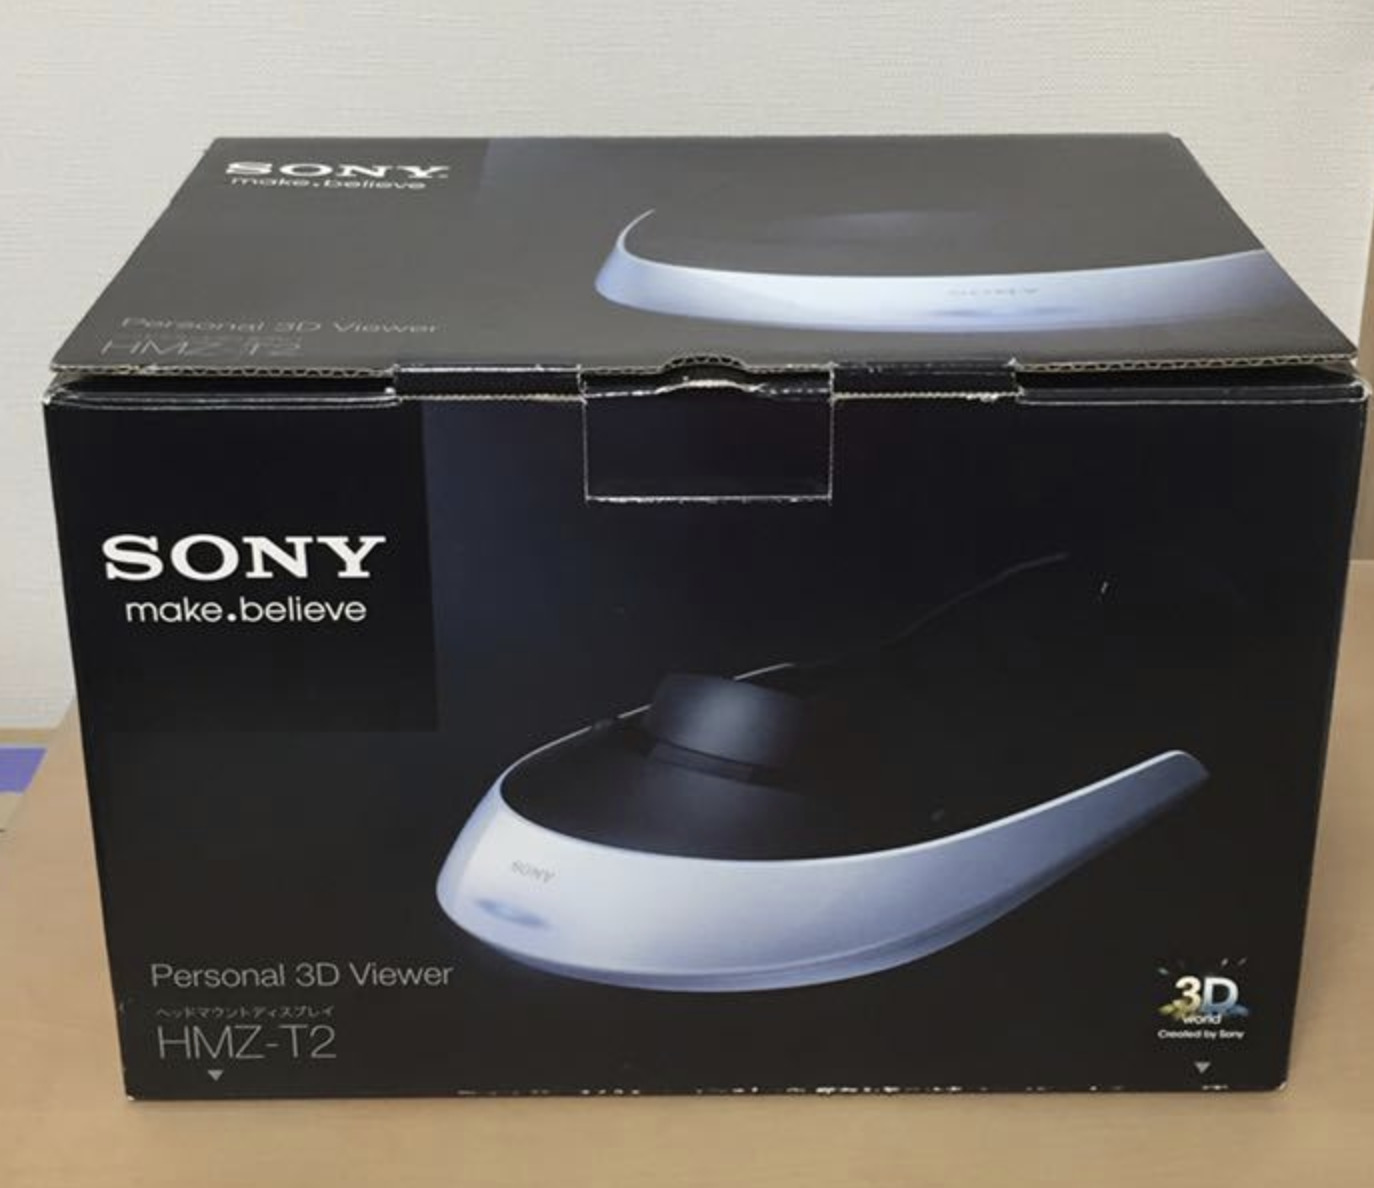 Sony HMZ-T2 Wearable HDTV Personal 3D Viewer Head mount display Headphone NM